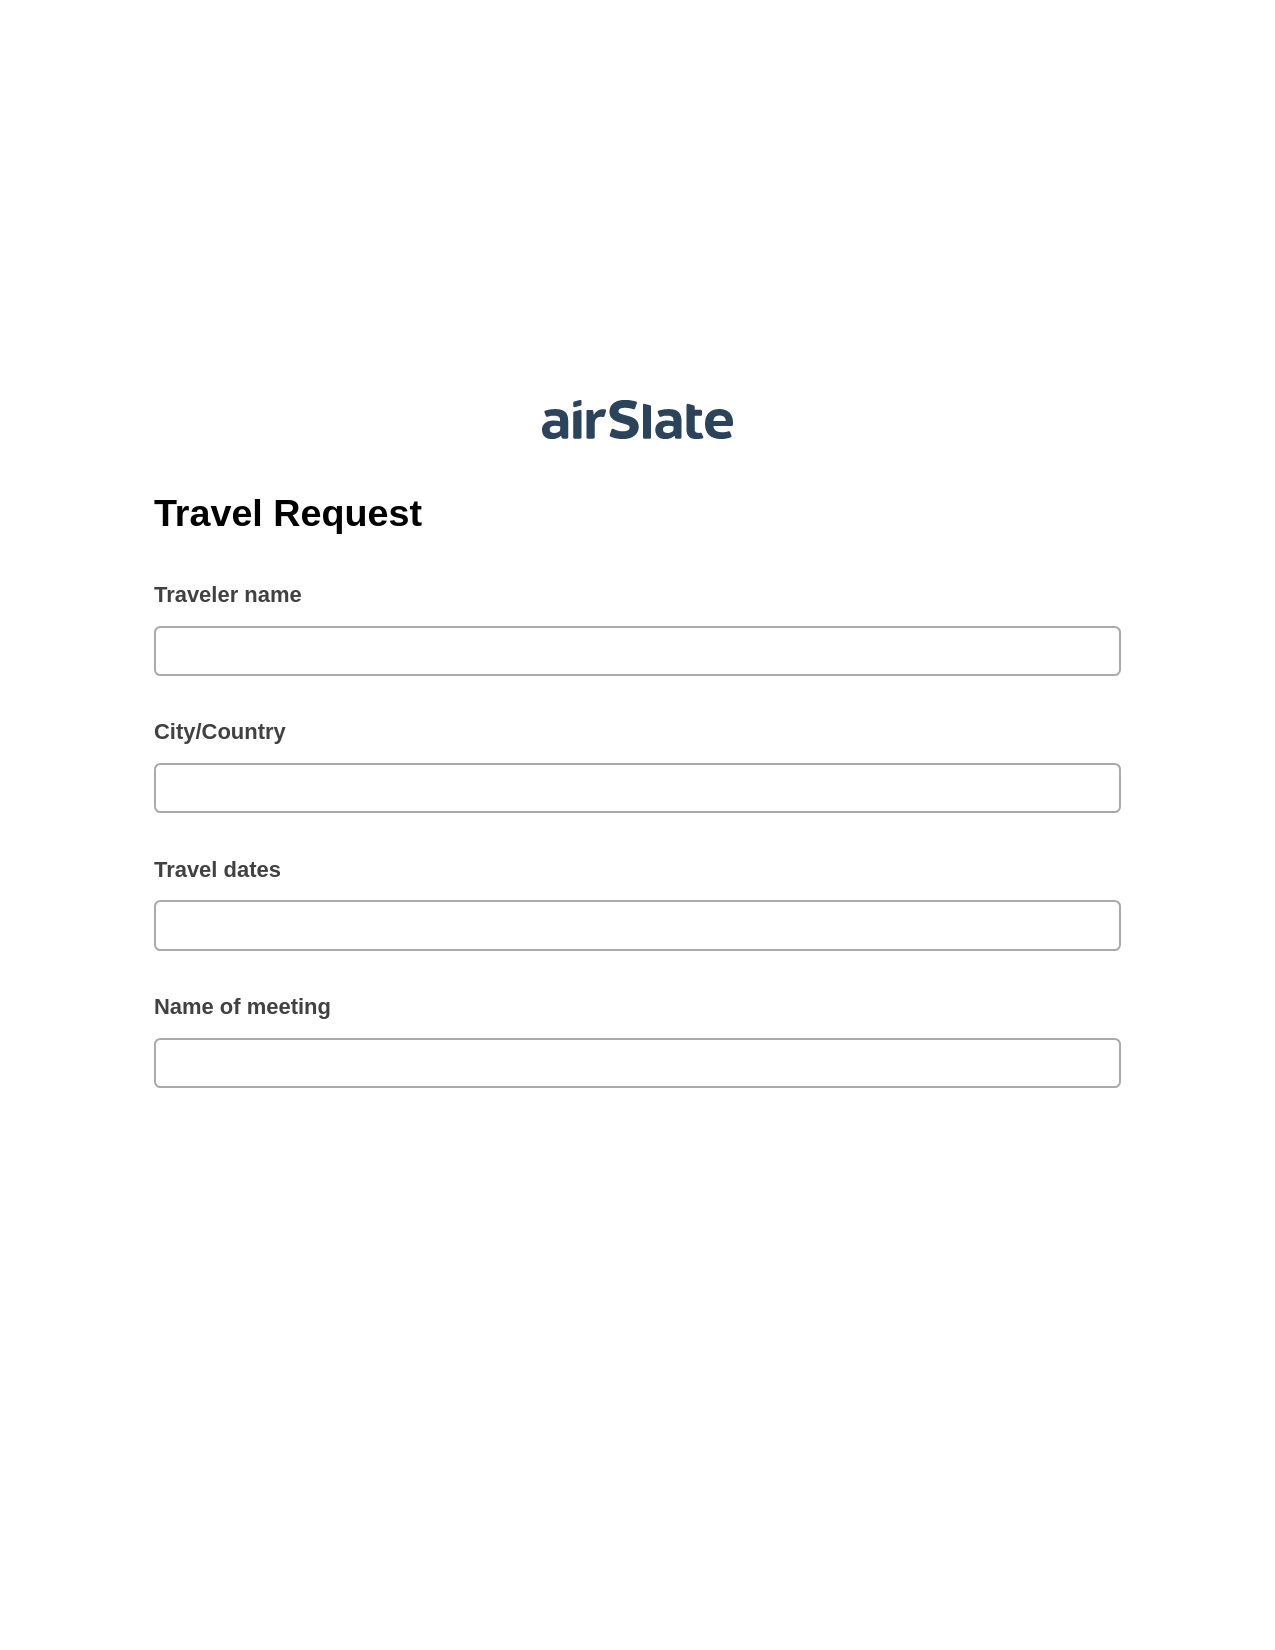 Travel Request Pre-fill from Salesforce Record Bot, Create slate from another Flow Bot, Archive to SharePoint Folder Bot